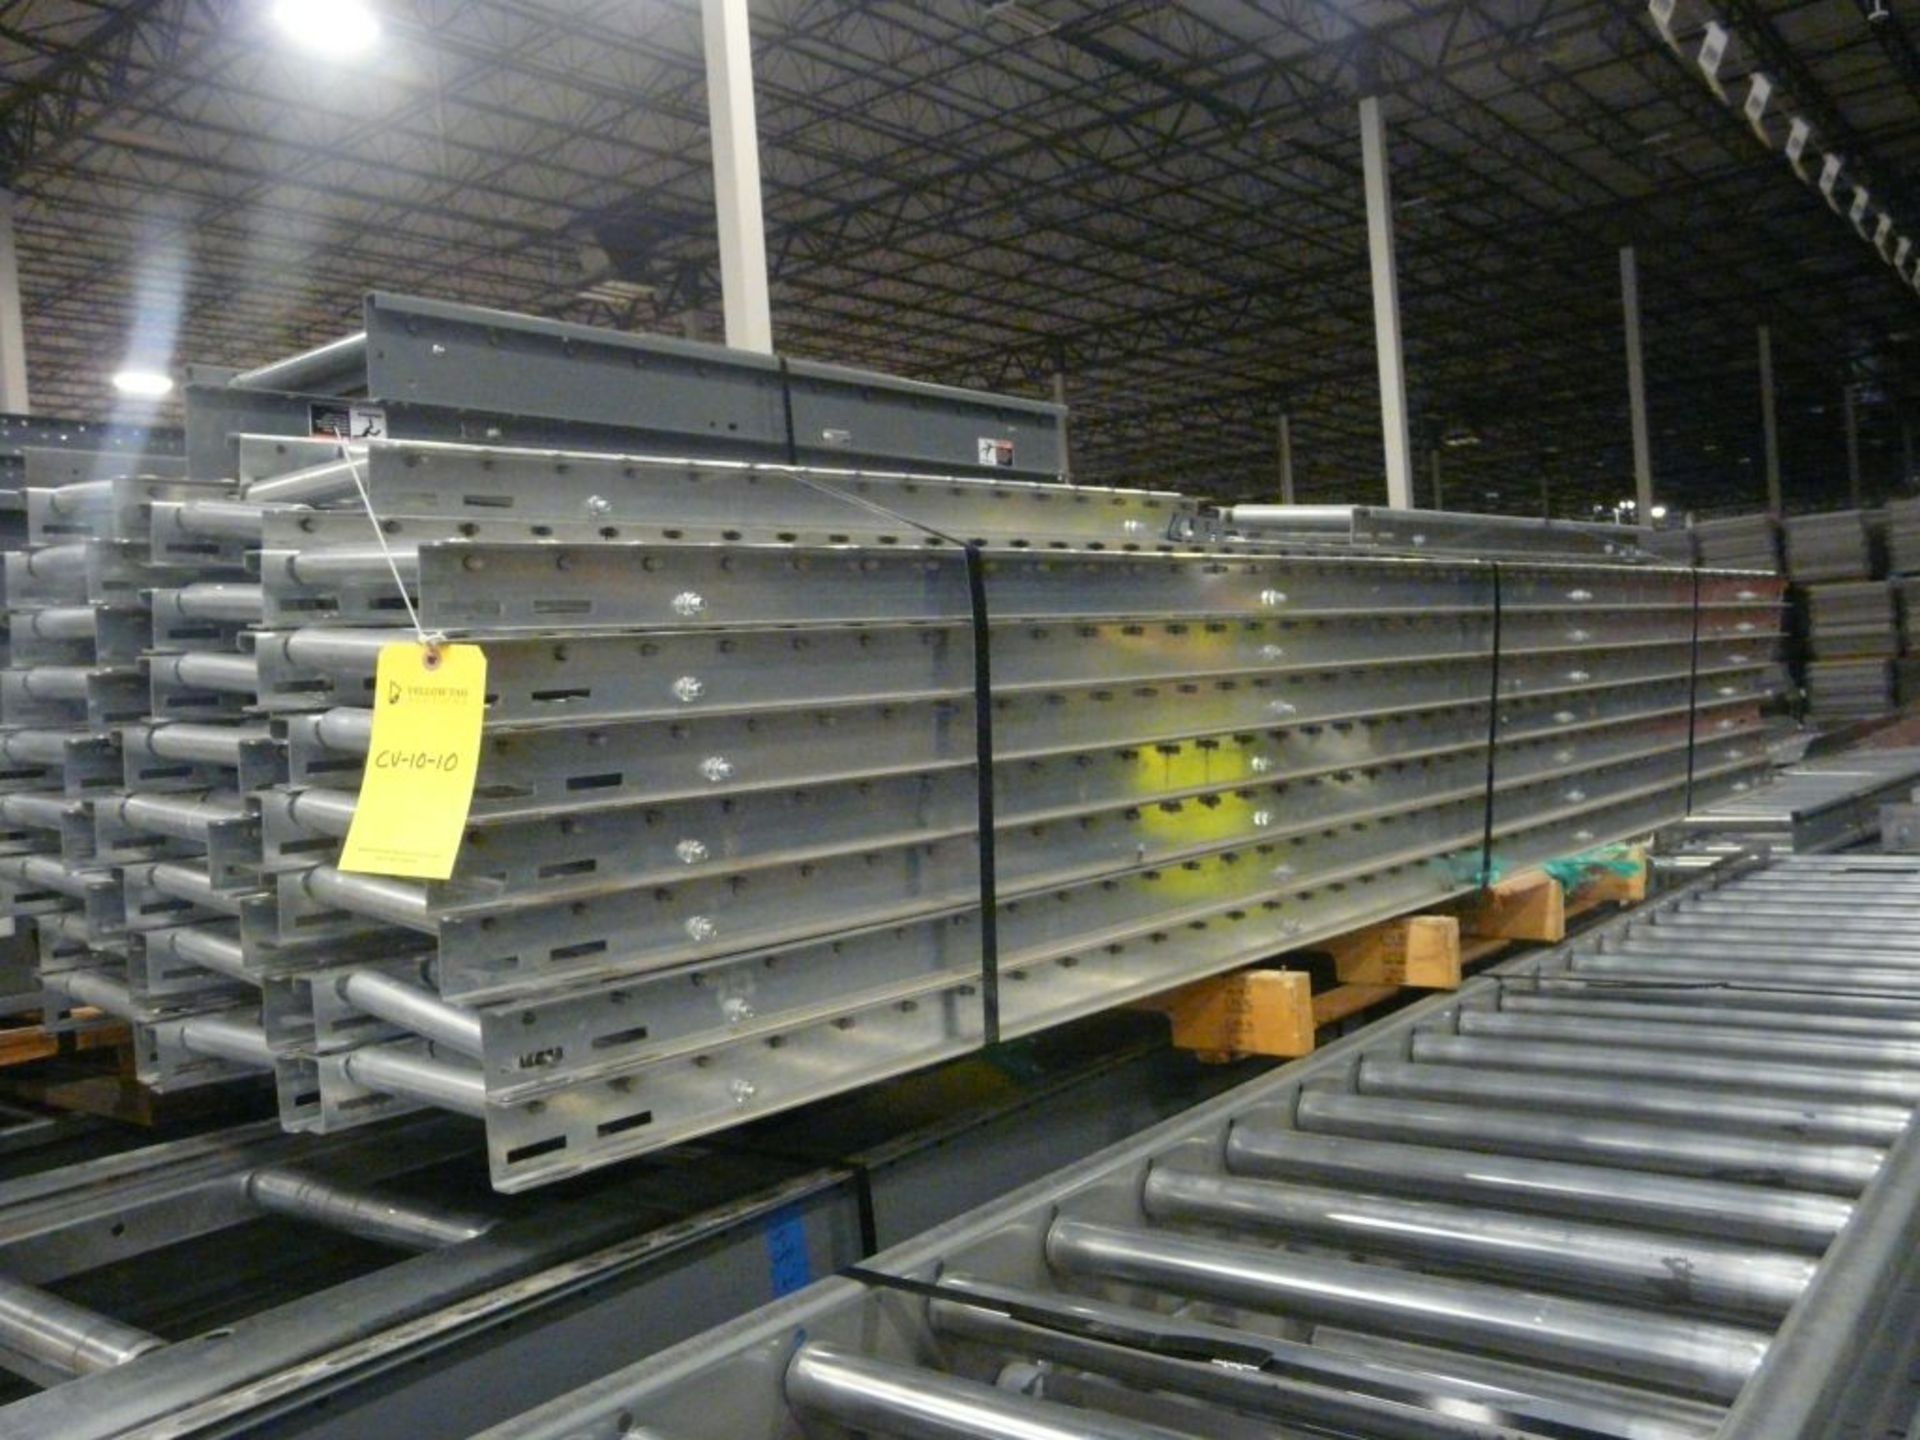 Lot of (26) Conveyors - 10'L x 10"W; Tag: 223543 - $30 Lot Loading Fee